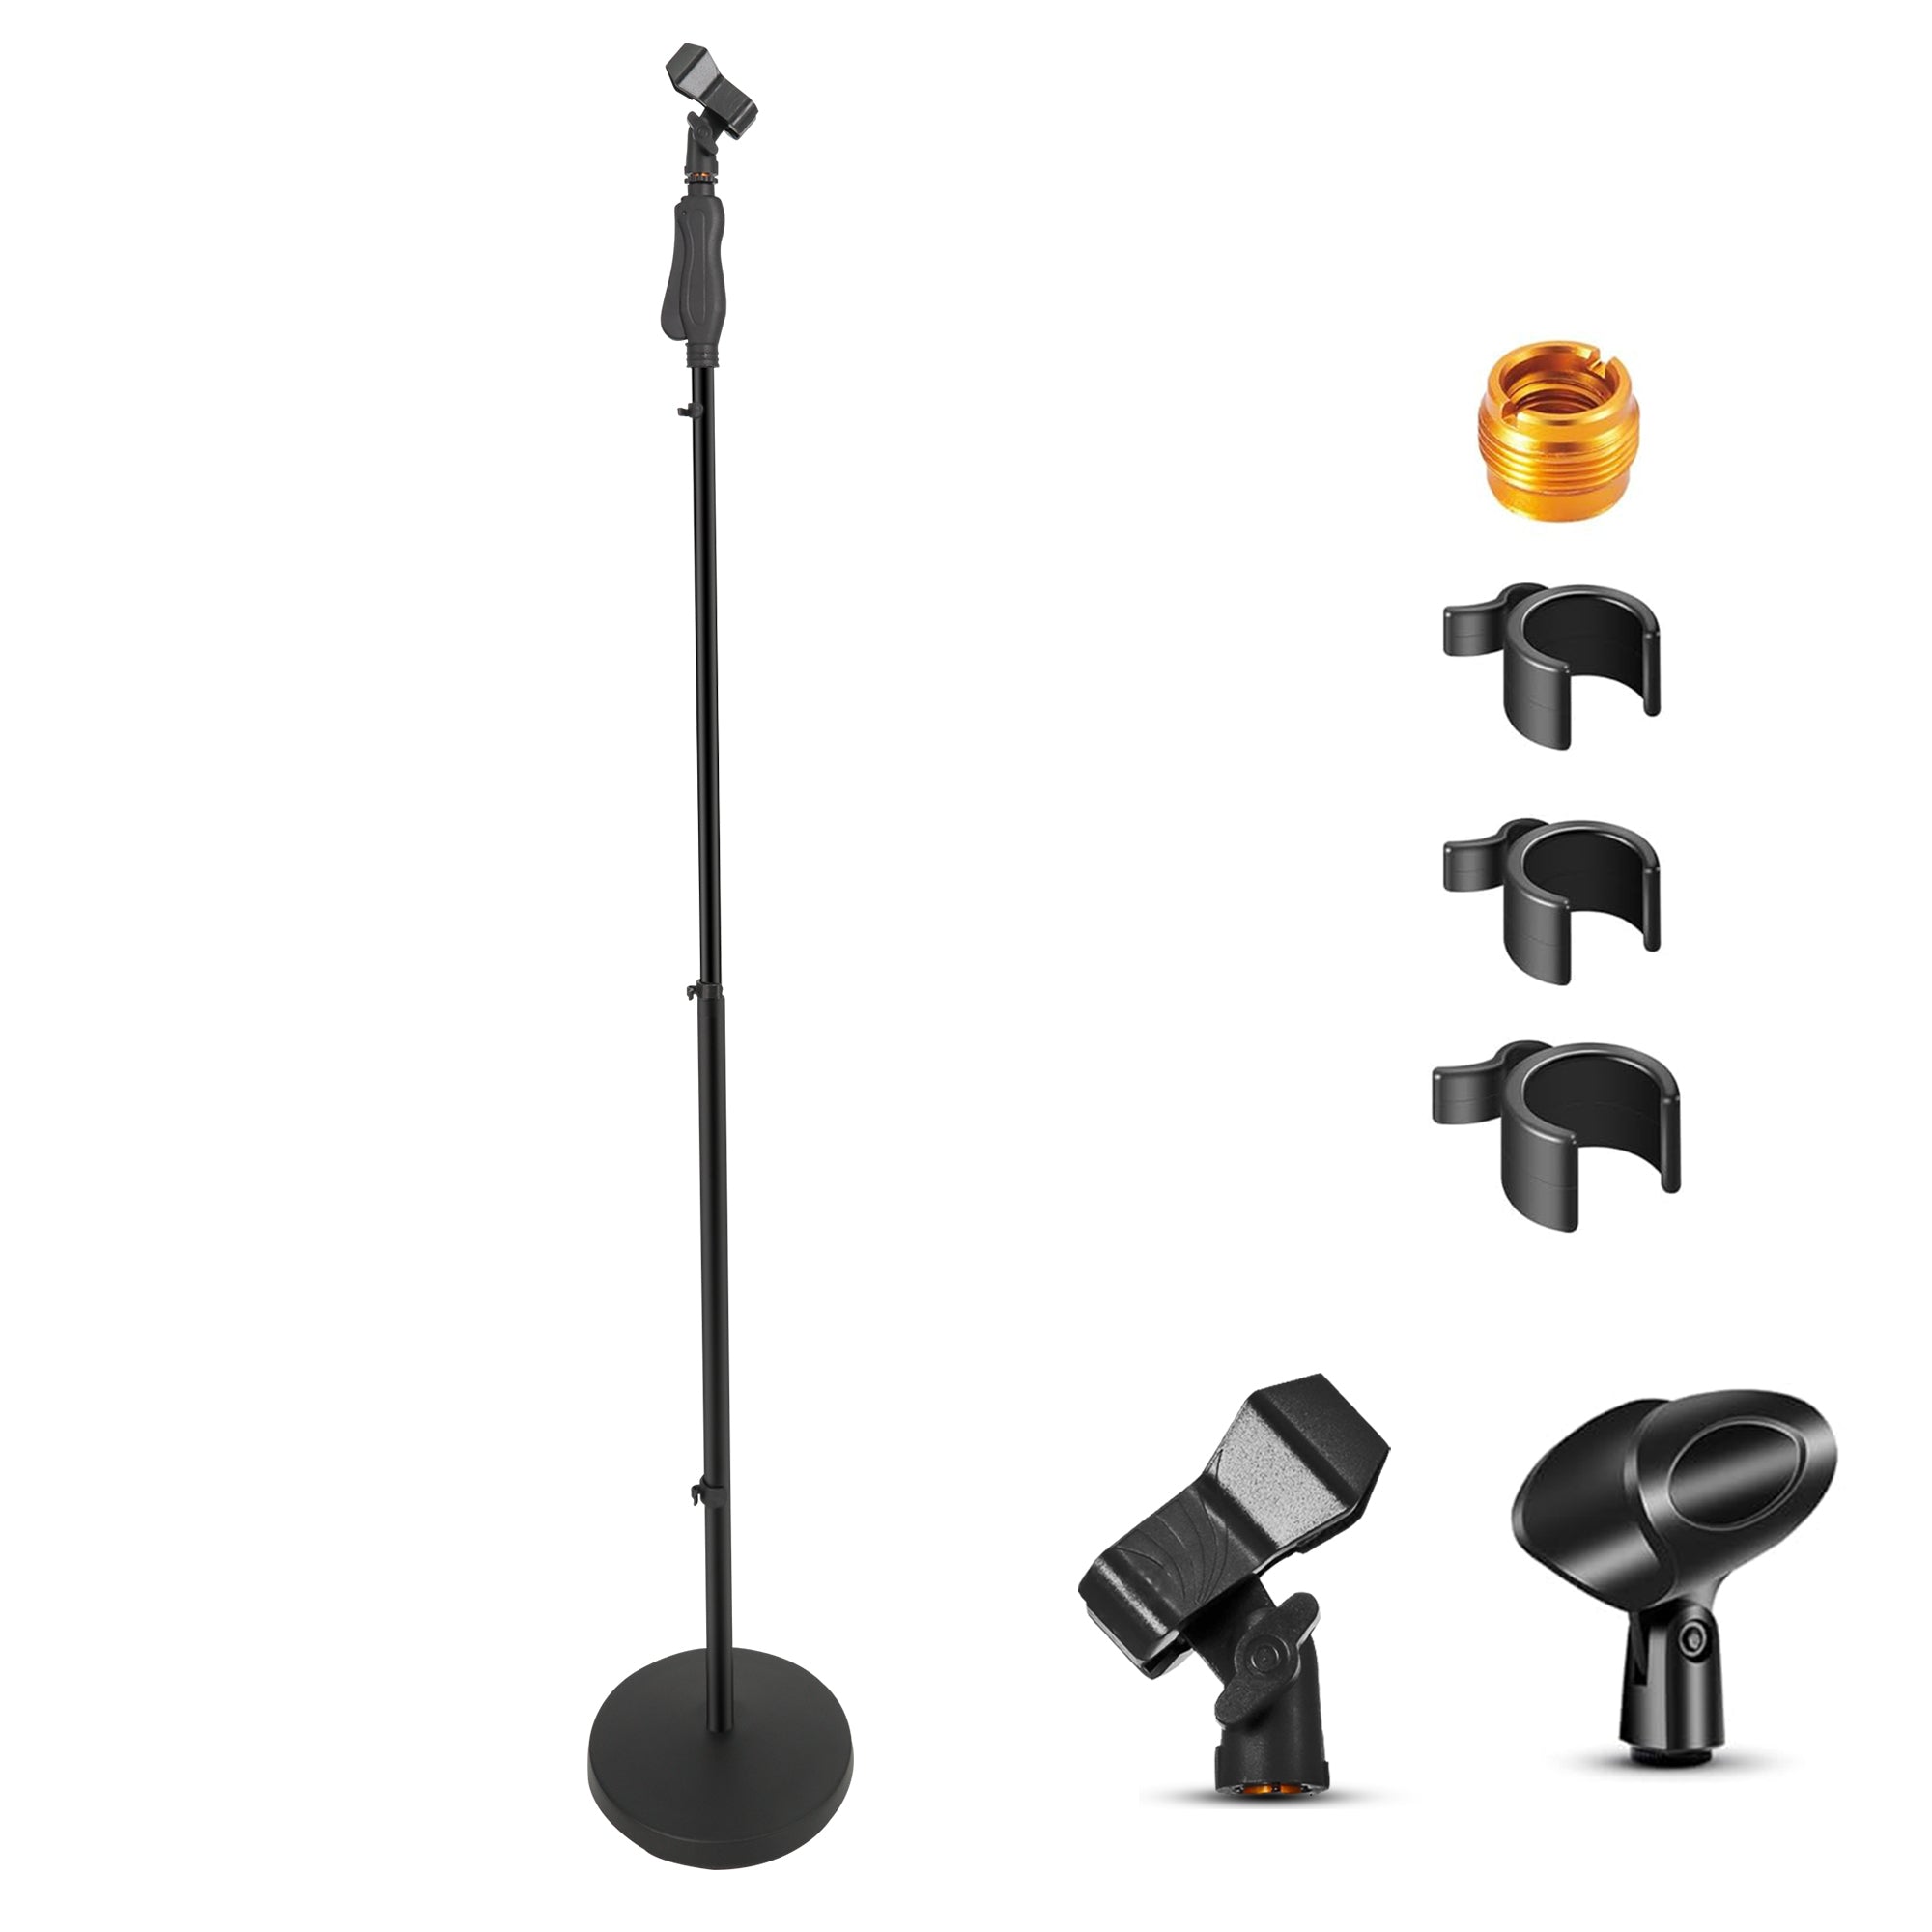 5Core Universal Microphone Stand Height Adjustable 35 to 57" Round Base Floor Mic Holder Metal Build